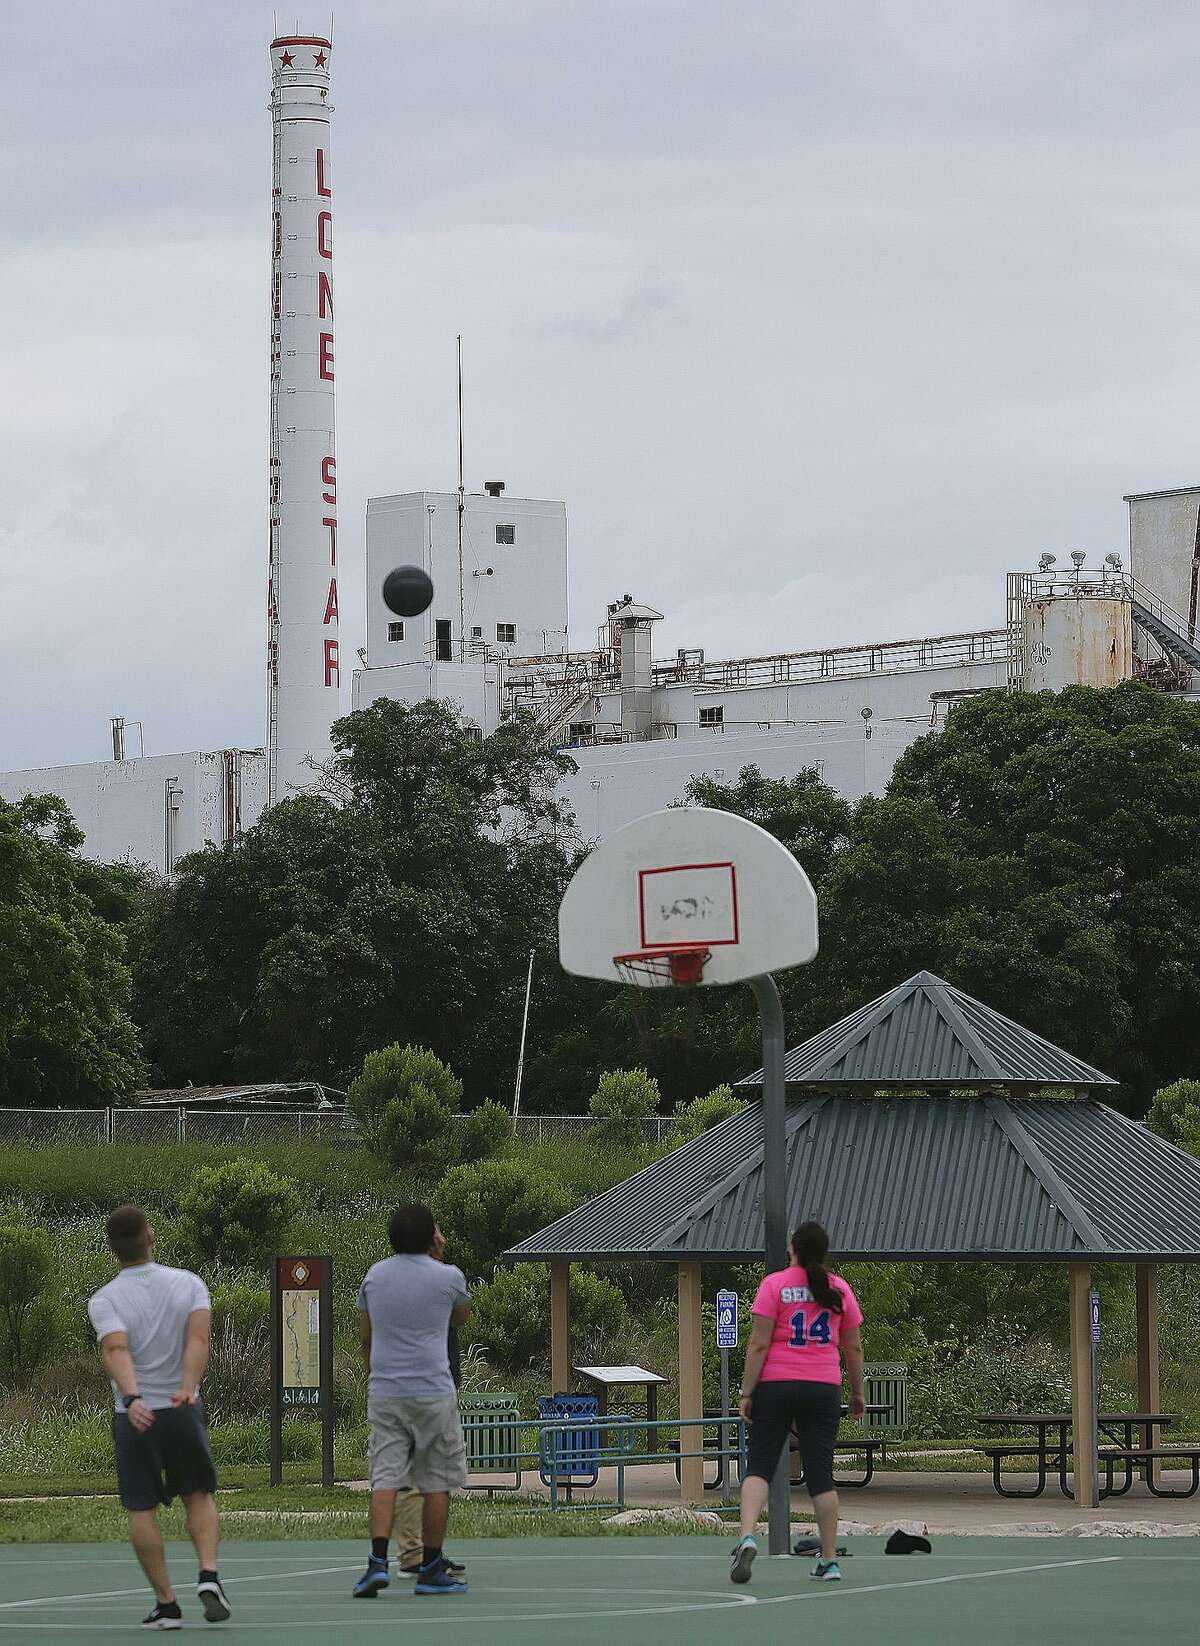 People play basketball Tuesday May 5, 2015 near the old Lone Star brewery. The property has sat unused since closing in 1996. The property is located between the San Antonio River and Newell Recycling.